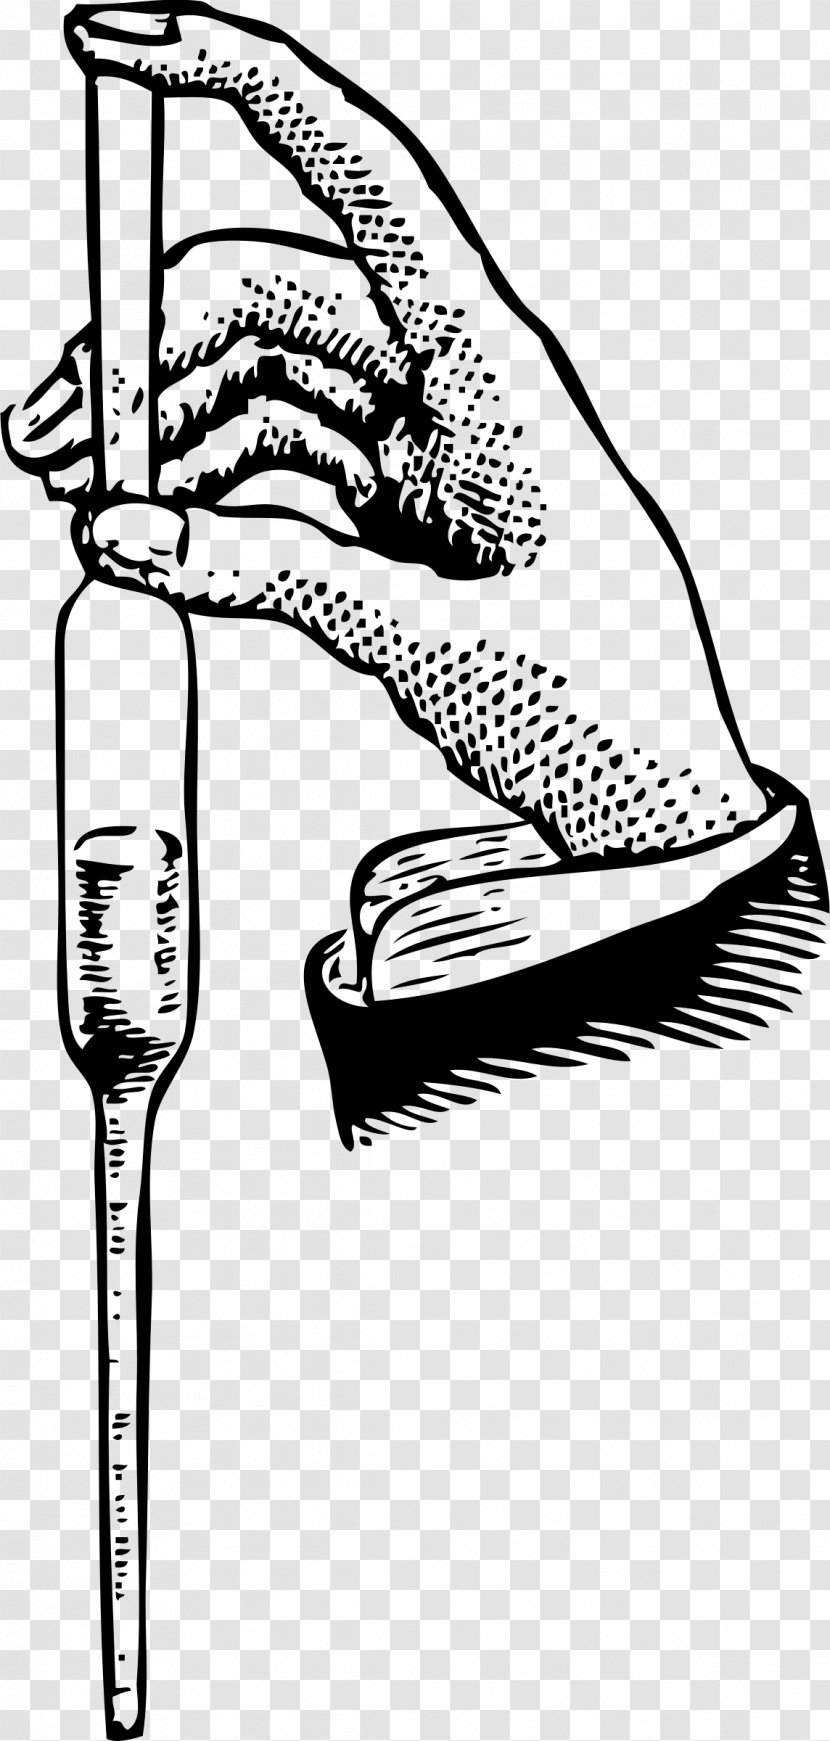 Pipette Laboratory Eppendorf Clip Art - Chemistry - Graduated Material Transparent PNG